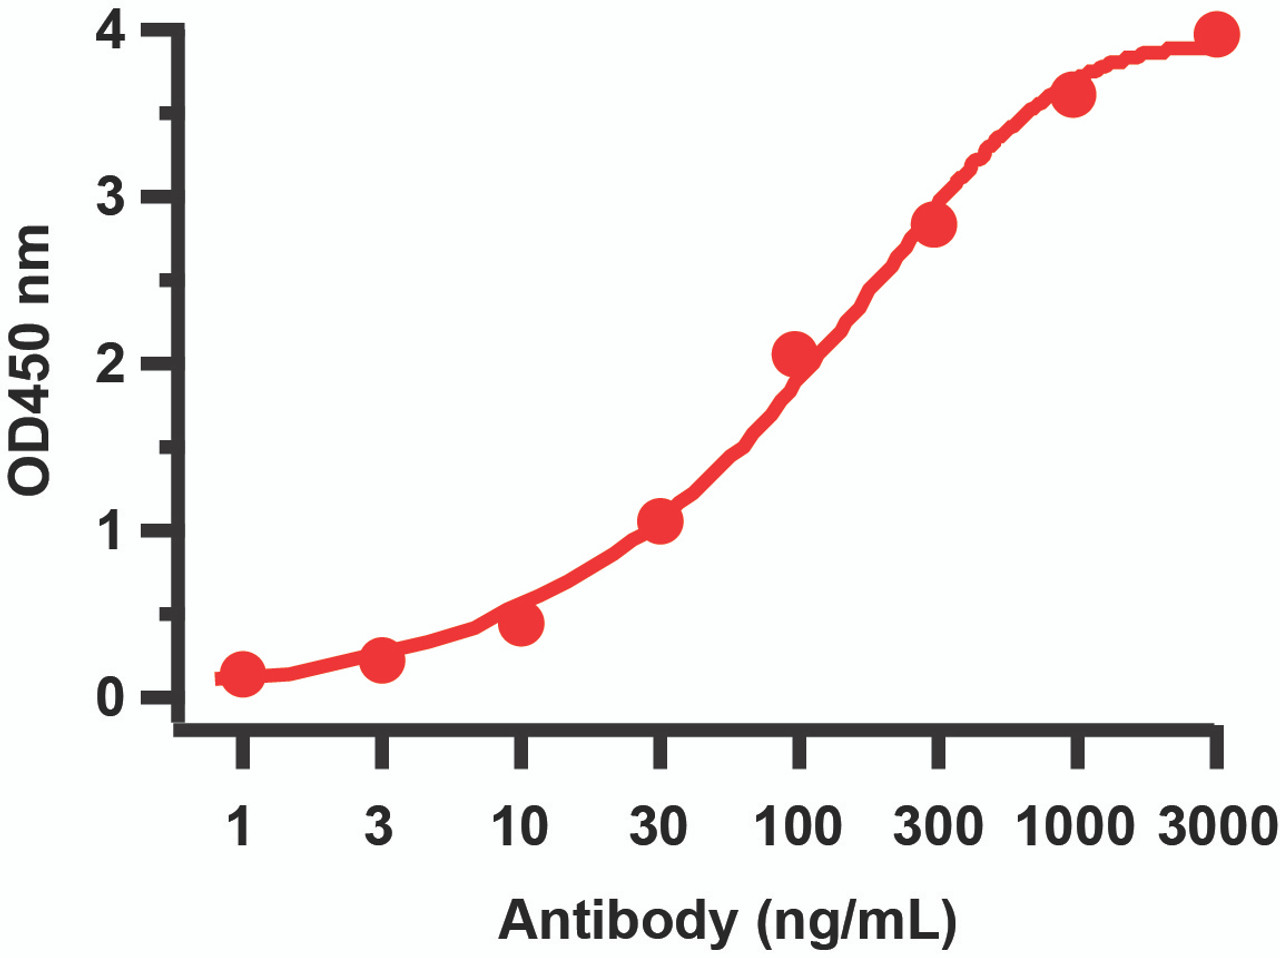 Figure 2 ELISA Validation with SARS-CoV-2 (COVID-19) NSP2 Protein Antibodies: SARS-CoV-2 (COVID-19) NSP2 Antibody, 9173 A direct ELISA was performed using SARS-CoV-2 NSP2 recombinant protein (10-425) as coating antigen and the anti-SARS-CoV-2 (COVID-19) NSP2 antibody as the capture antibody Secondary: Goat anti-rabbit IgG HRP conjugate at 1:20000 dilution. Detection range is from 1 ng/mL to 3000 ng/mL.